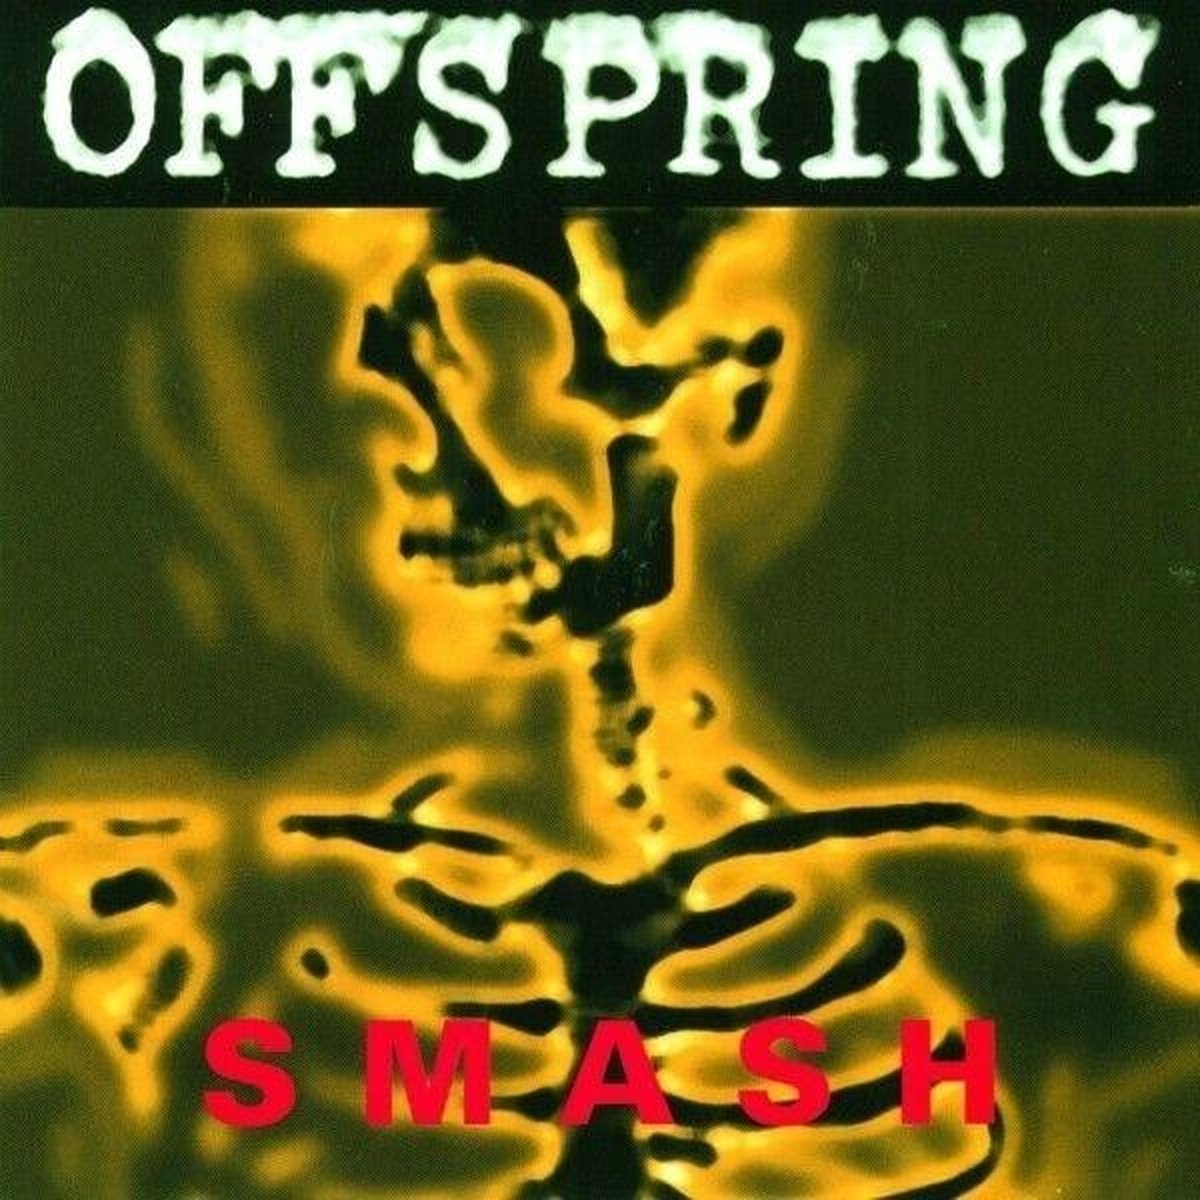 The Offspring - Smash (CD) (Remastered) - The Offspring